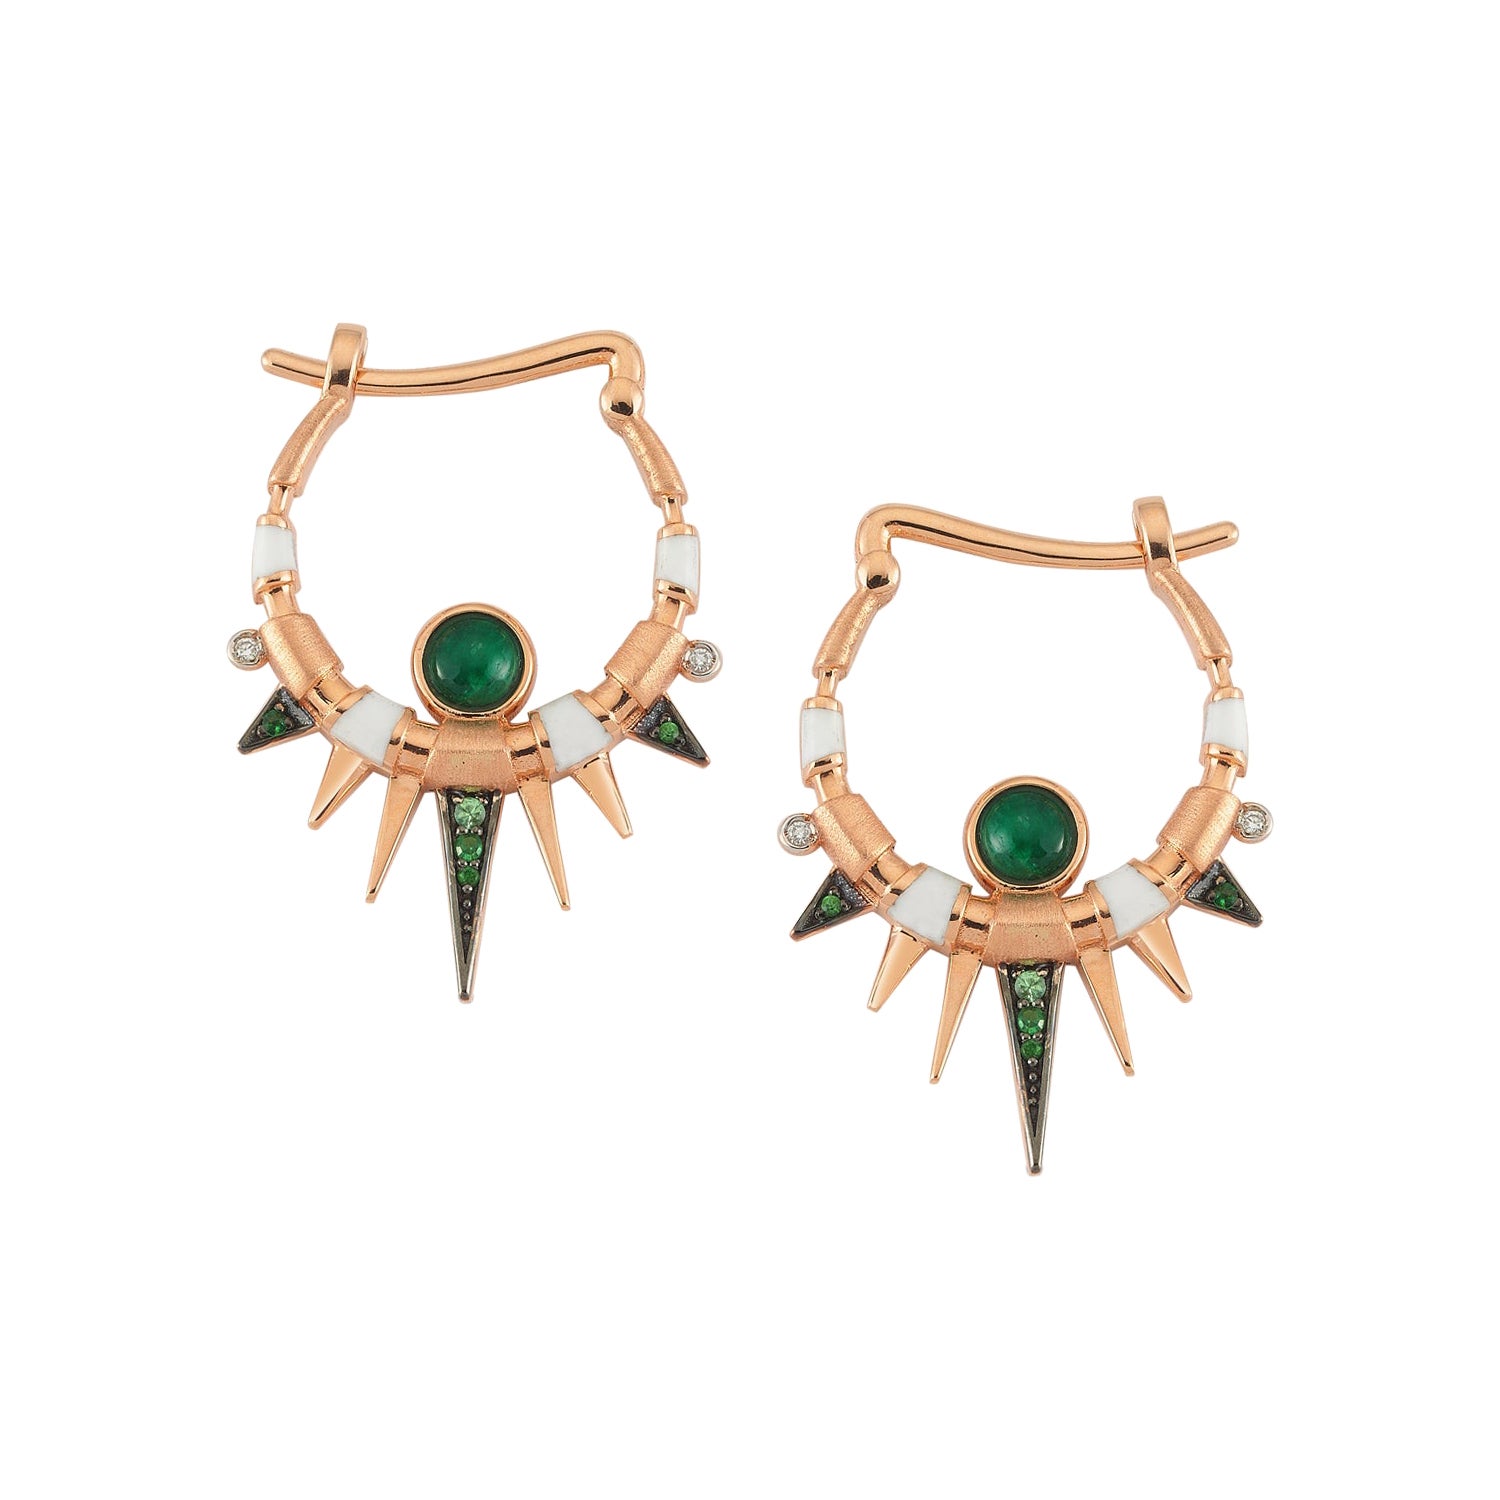 Cyra Hoop Earrings in Rose Gold with Emerald, White Diamond and Savorite